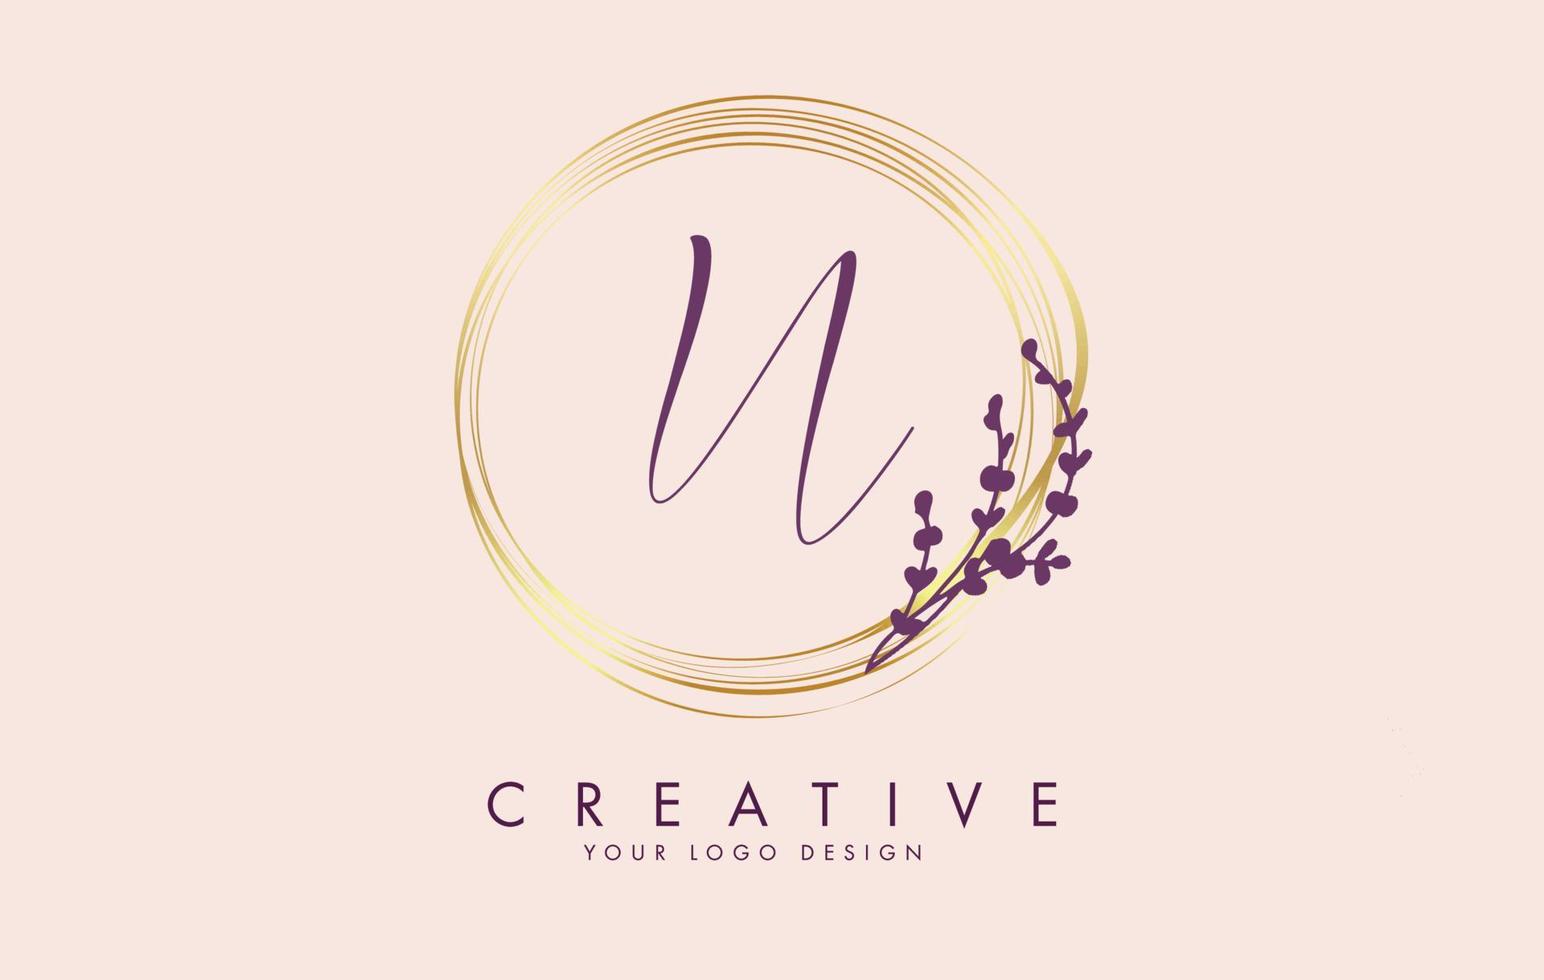 Handwritten N Letter logo design with golden circles and purple leaves on branches around. Vector Illustration with N letter.